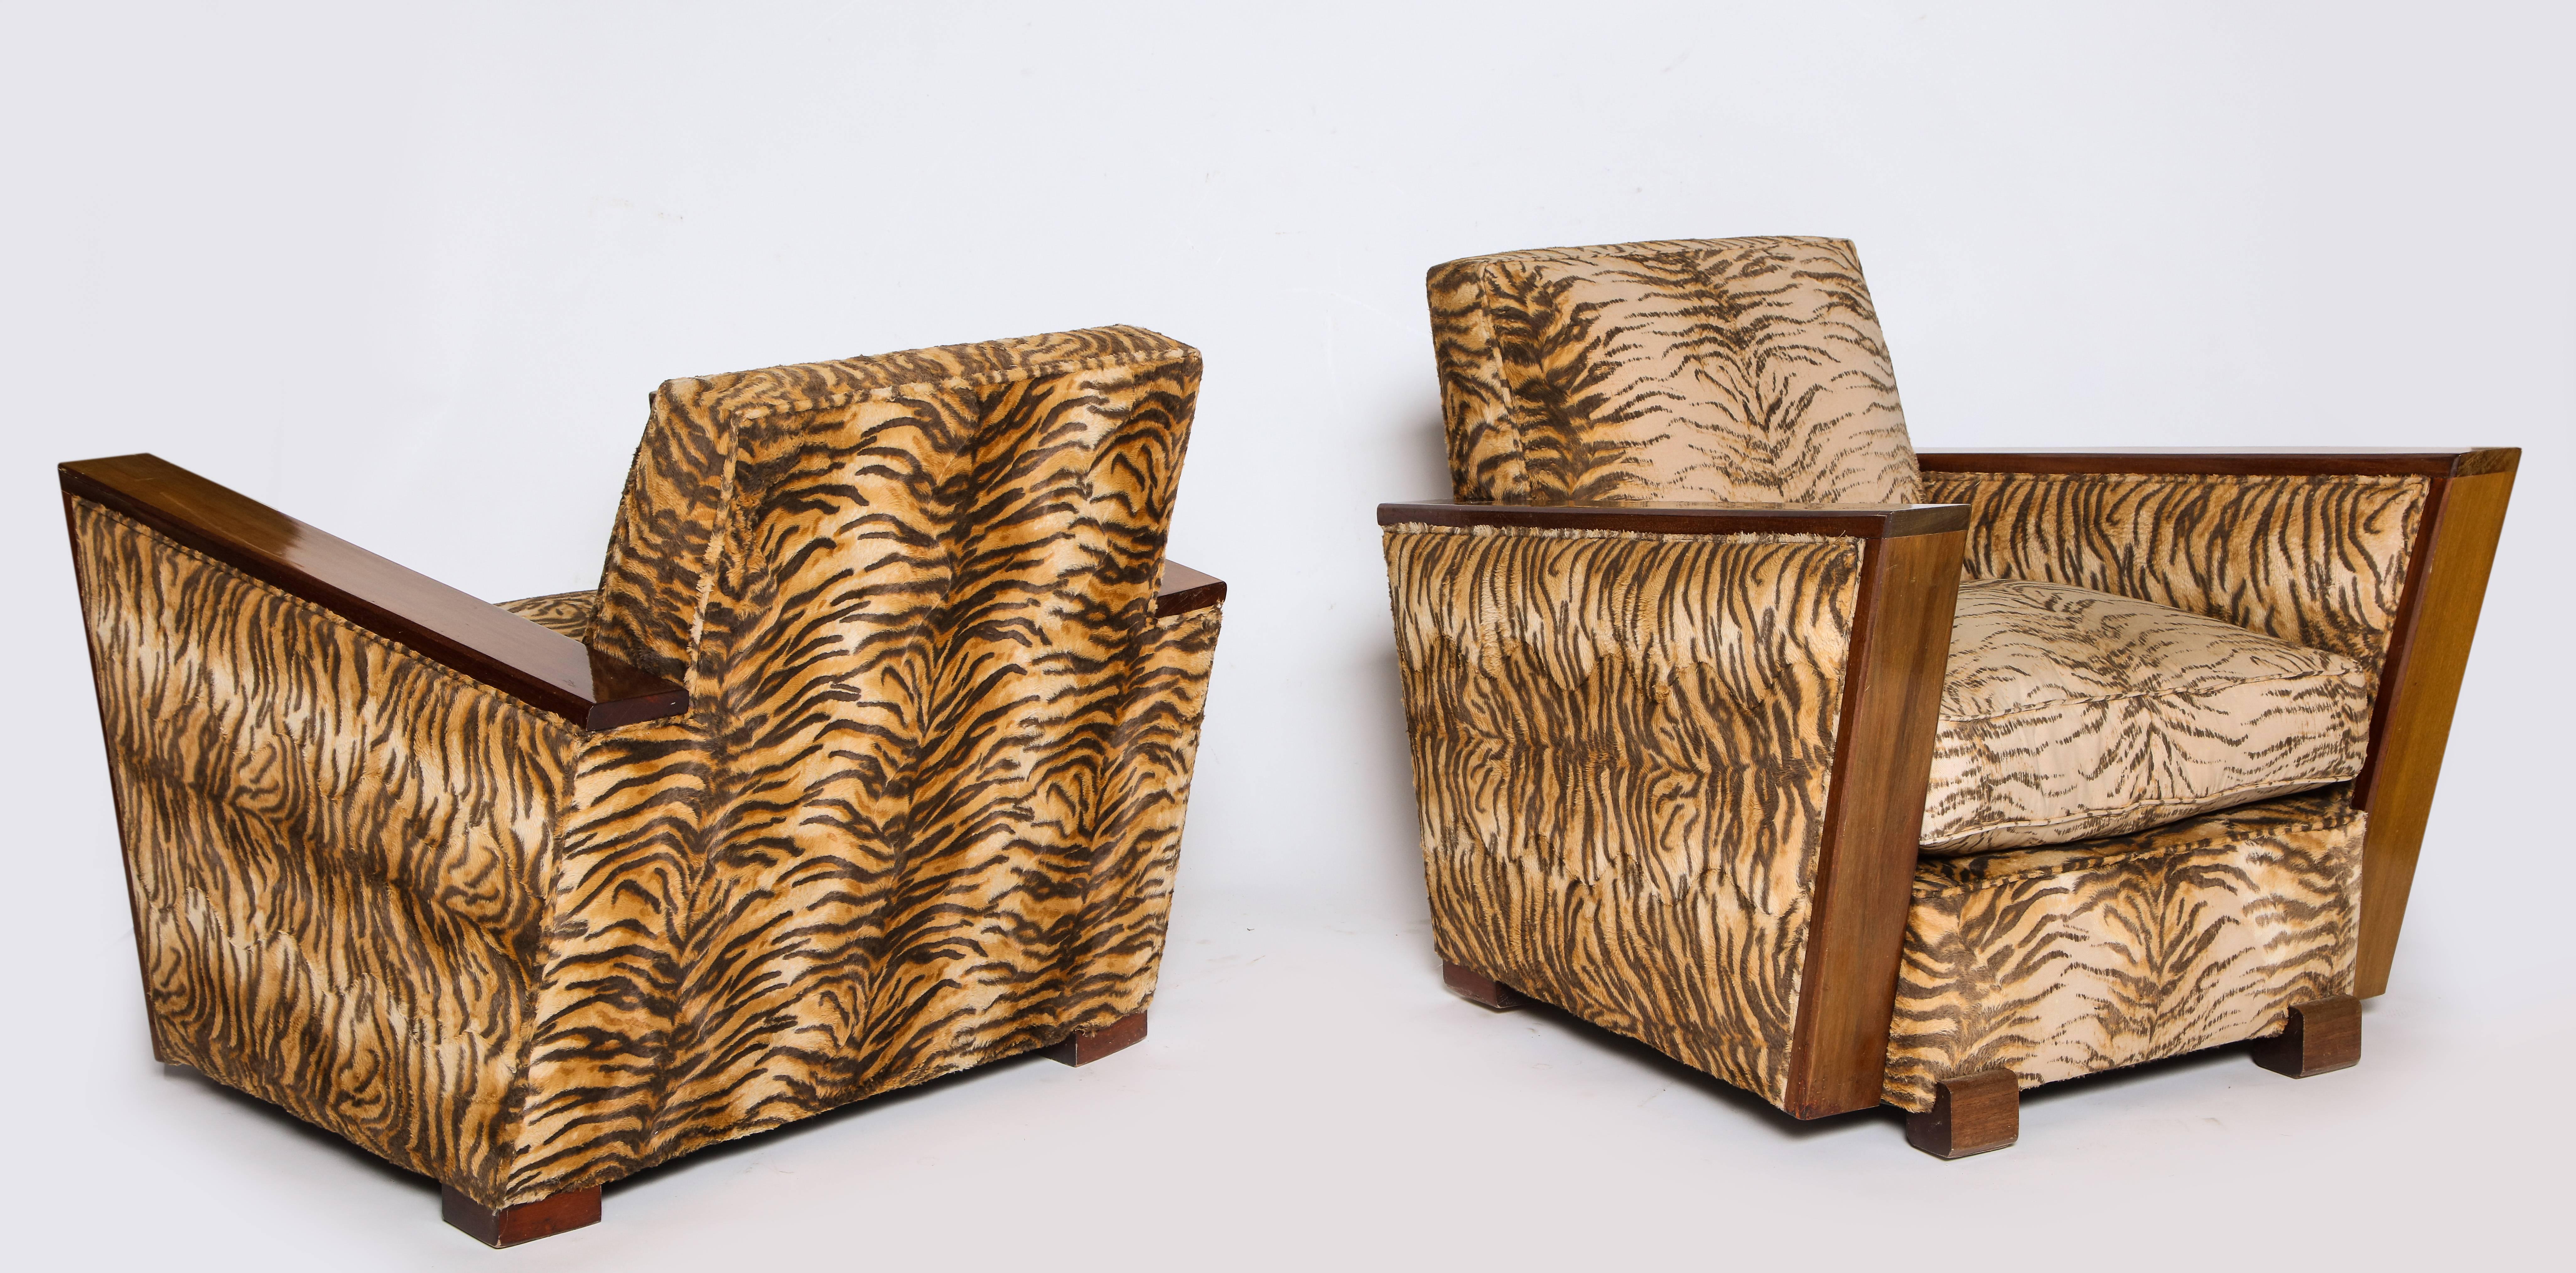 Deco chic animal print pair of chairs, France, 1940s

Chic pair of deco chairs in original lovely vintage condition. Interesting angular arms that create a modern look. The fabric looks to be velvet and worn in perfectly. The wood is walnut.